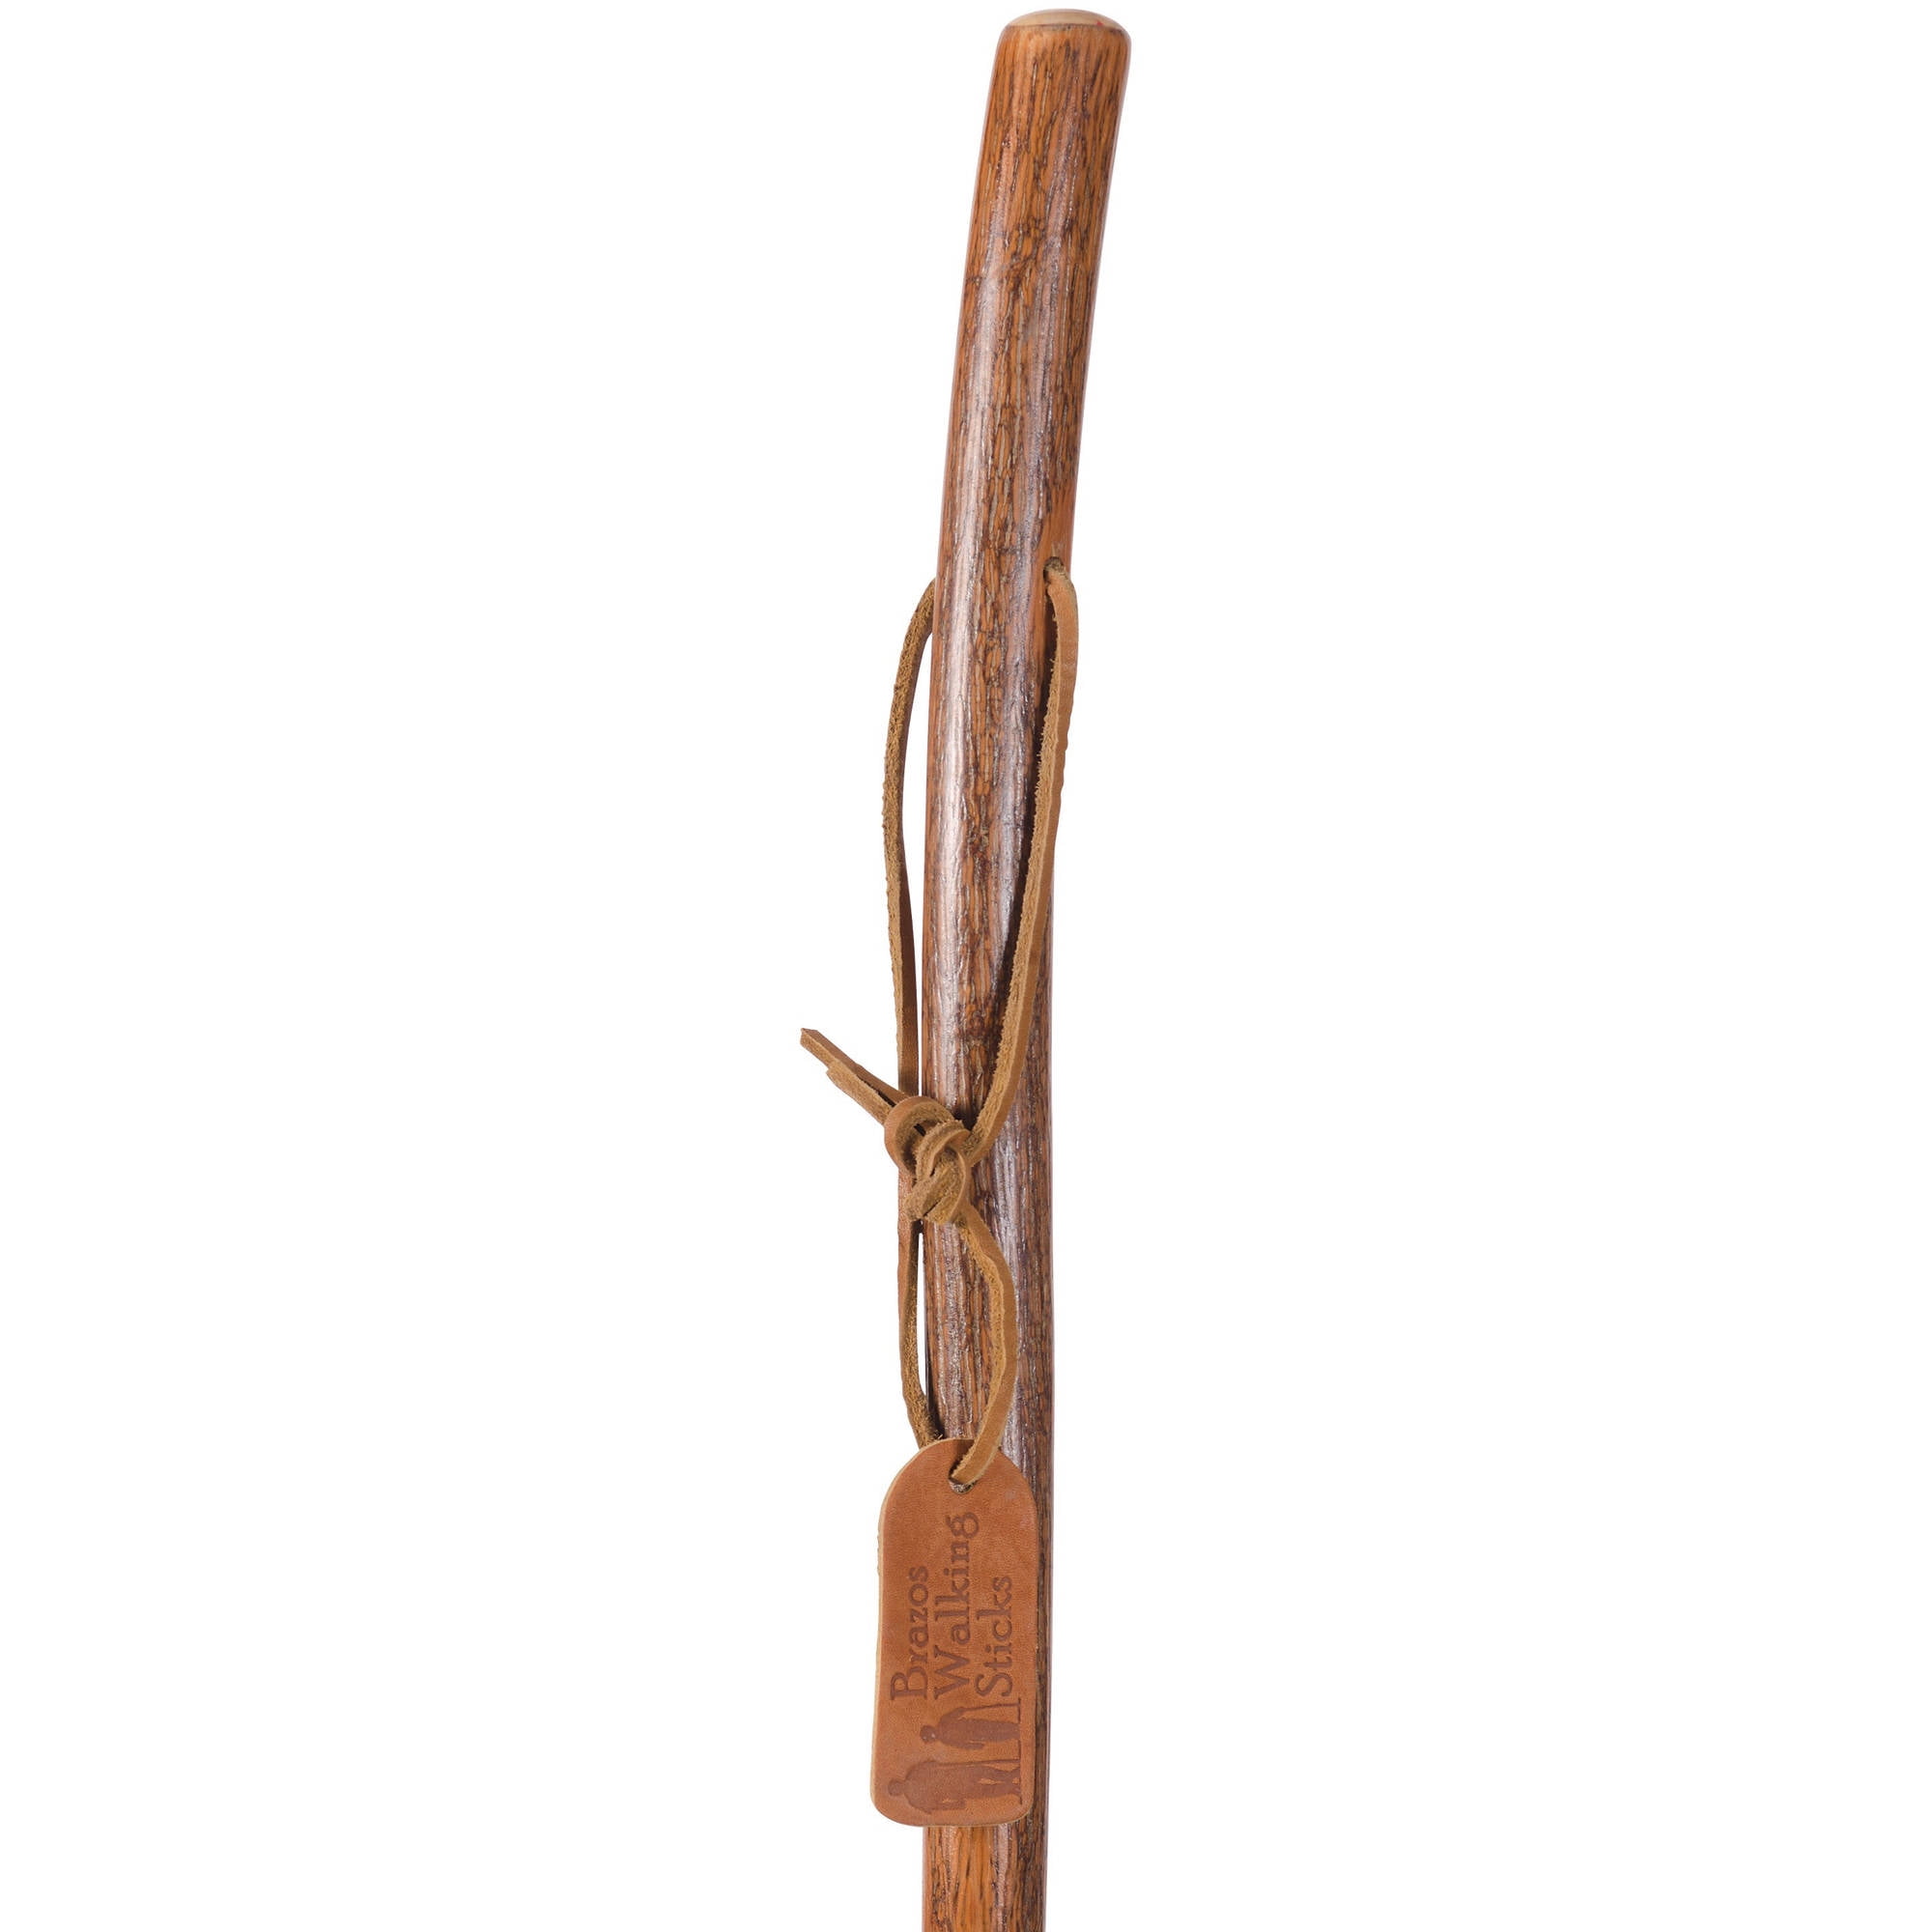 Twisted Sweet Gum 58 inches Handcrafted Wooden Walking & Hiking Stick Hiking Walking Trekking Stick Made in the USA by Brazos 